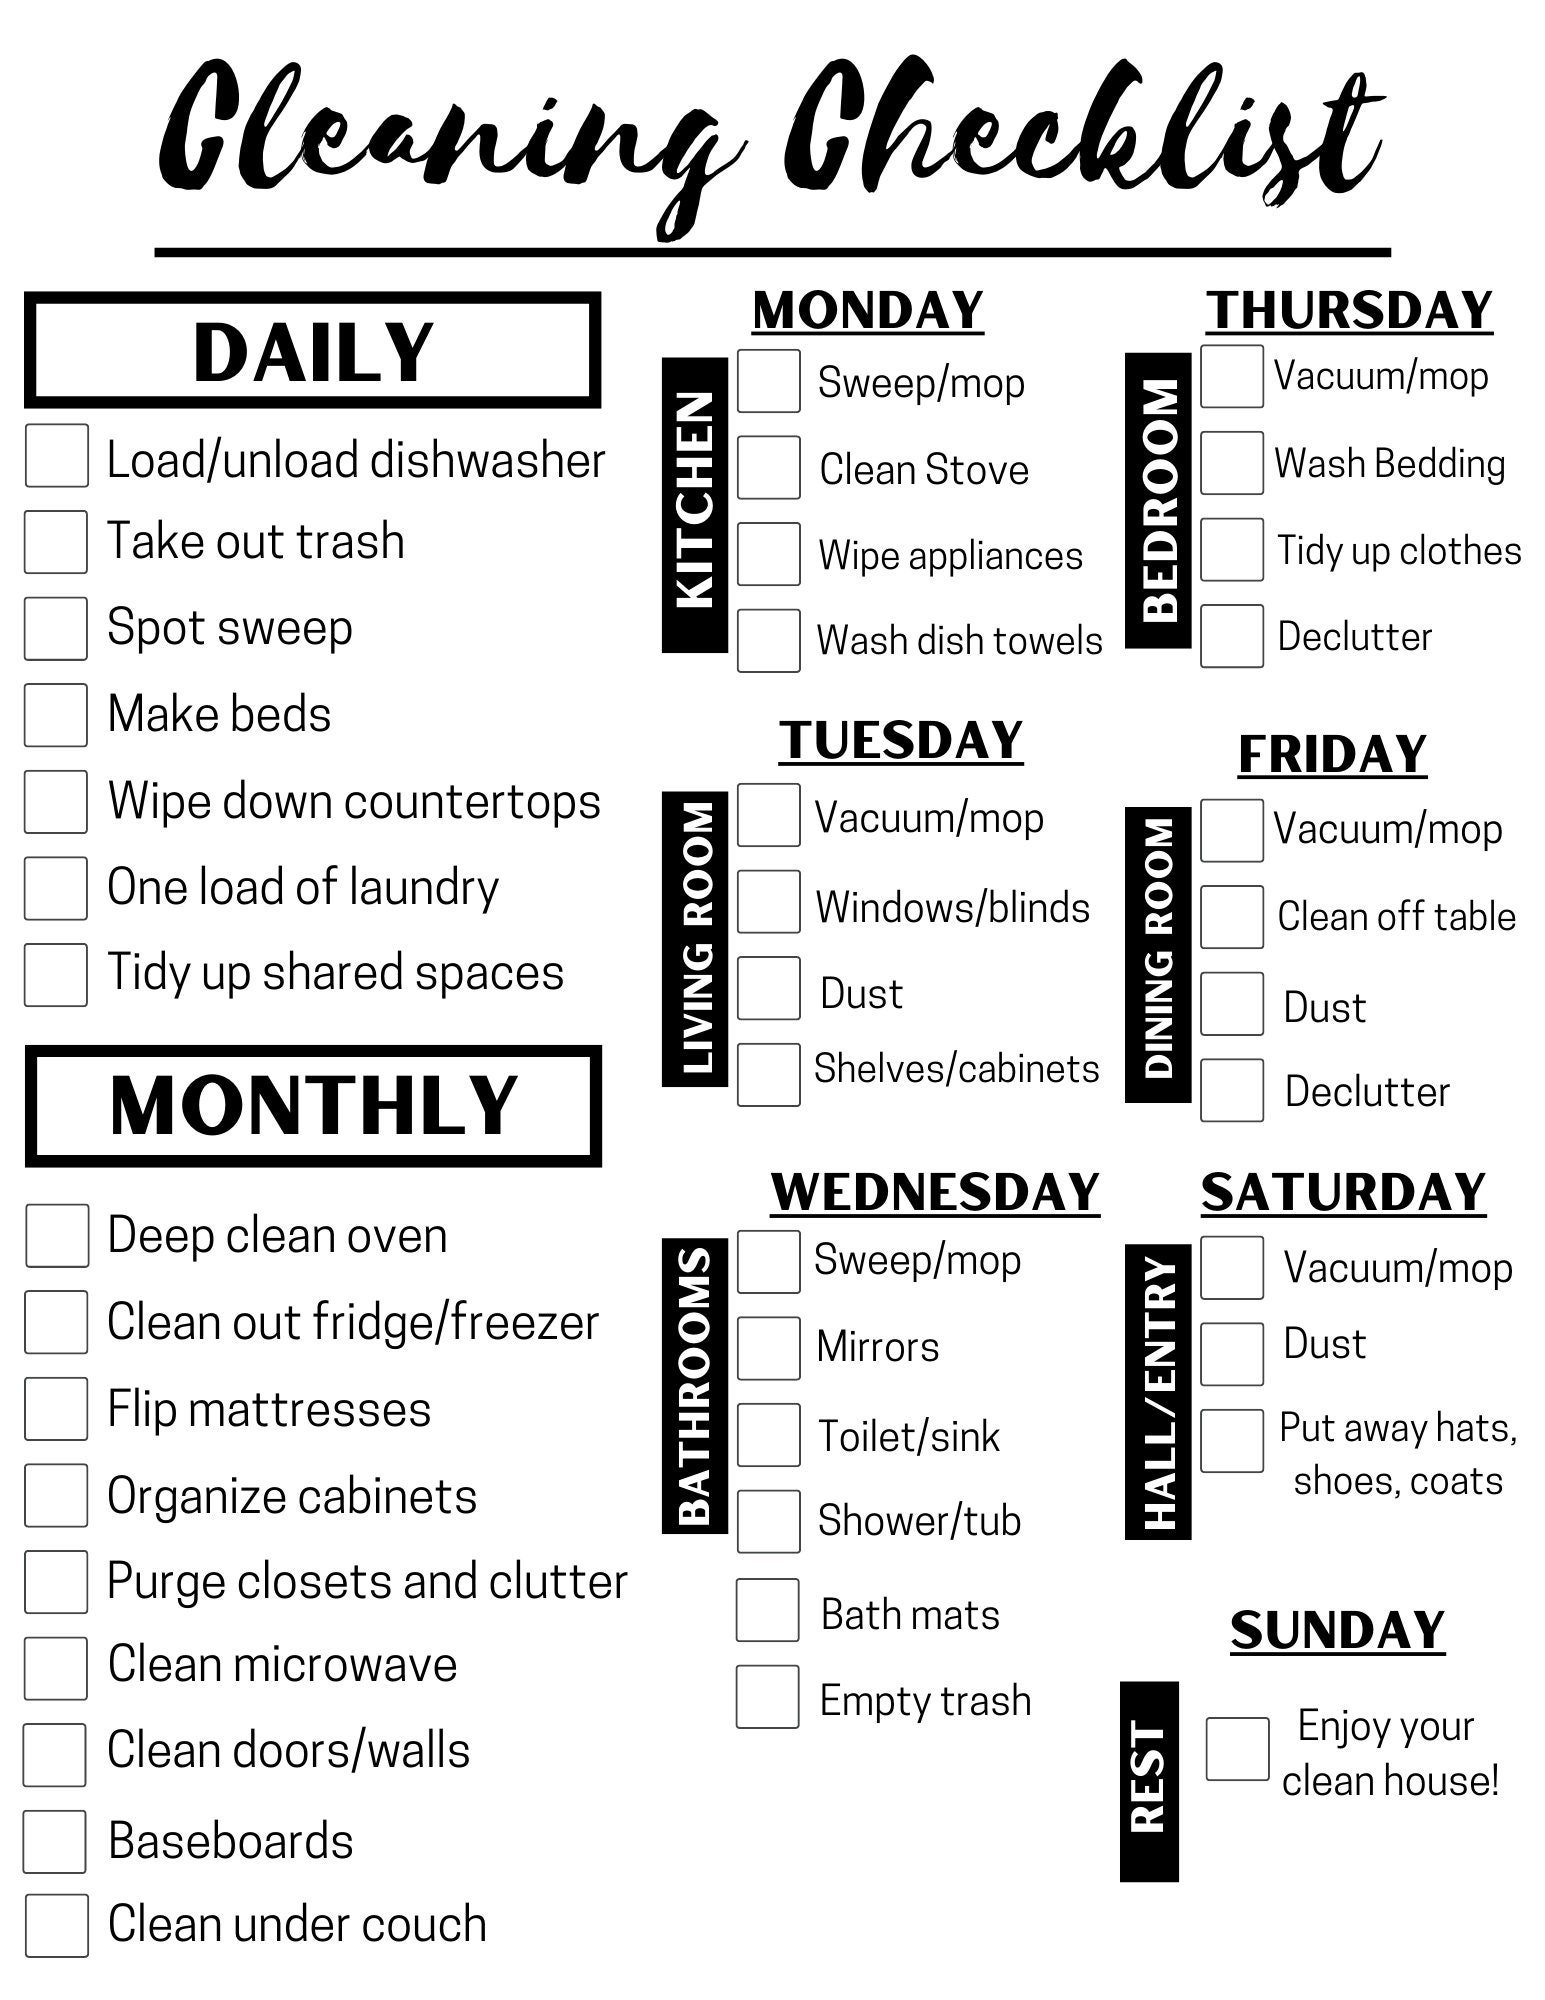 daily-weekly-monthly-cleaning-checklist-schedule-to-do-etsy-australia